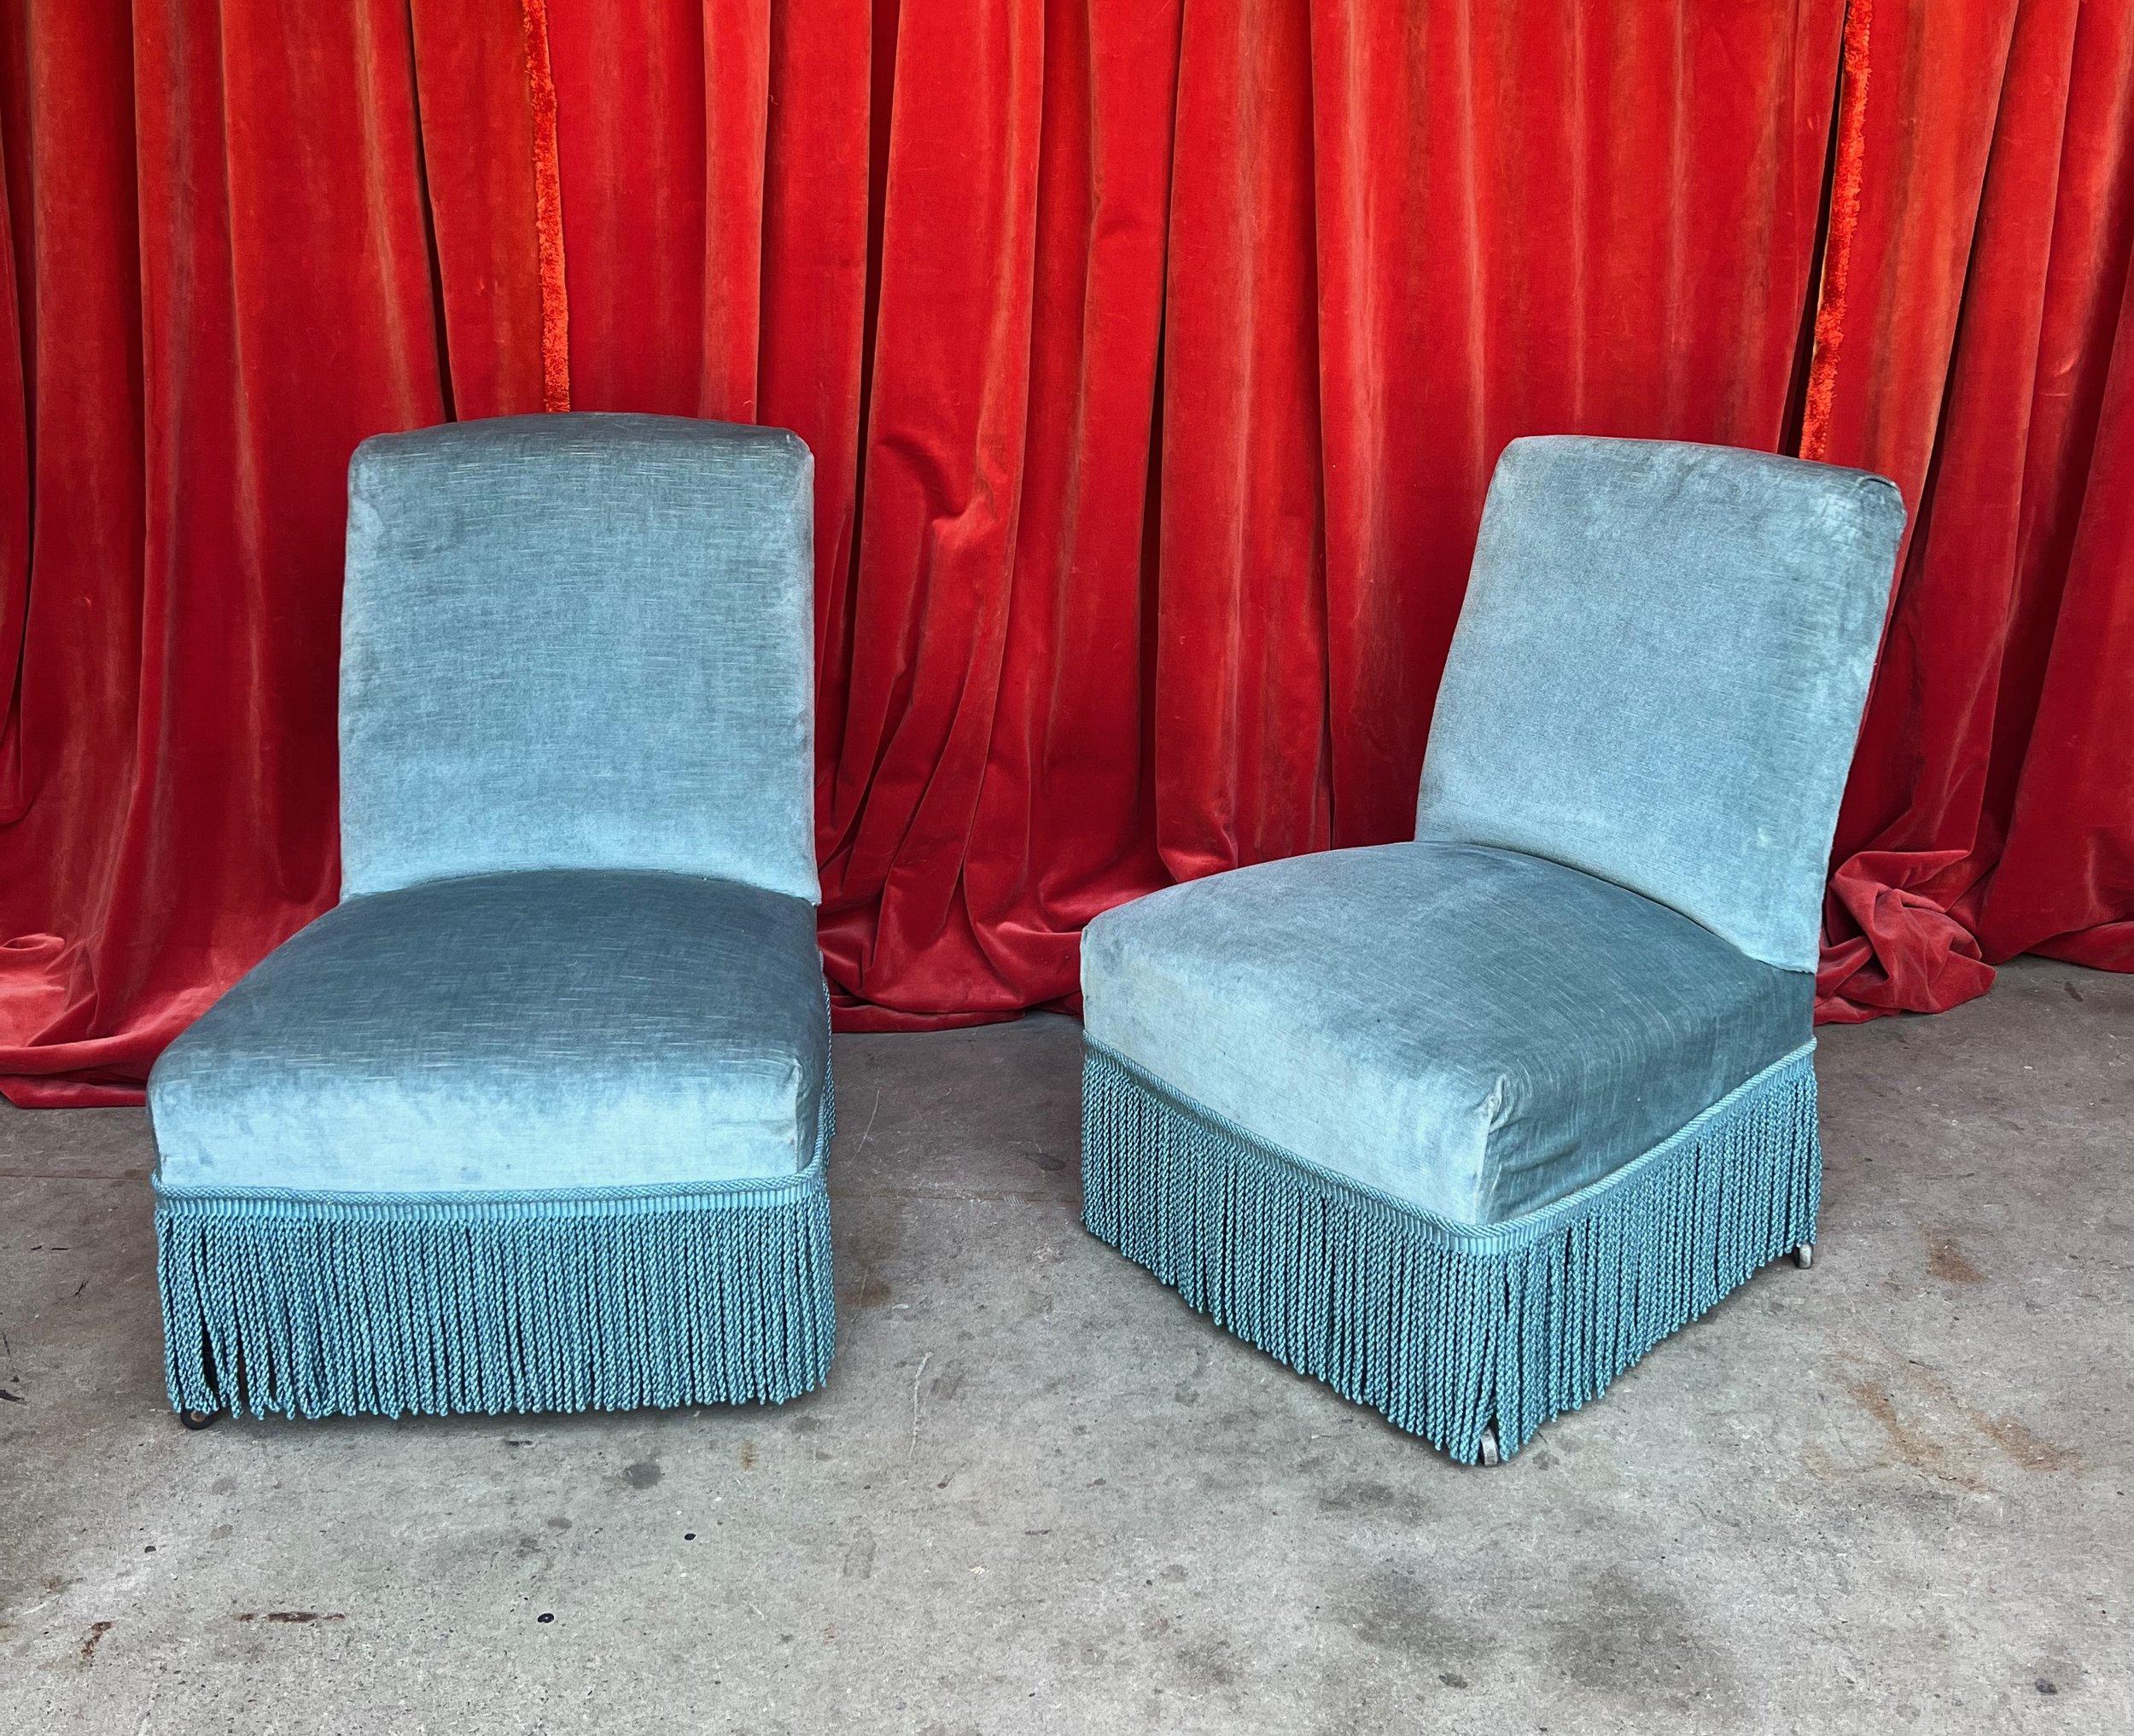 A charming pair of French Napoleon III slipper chairs, adorned in an exquisite light blue velvet fabric that instantly captivates the eye. These delicate pieces boast a classic French vintage design, enhanced by a tasteful bullion fringe, gracefully